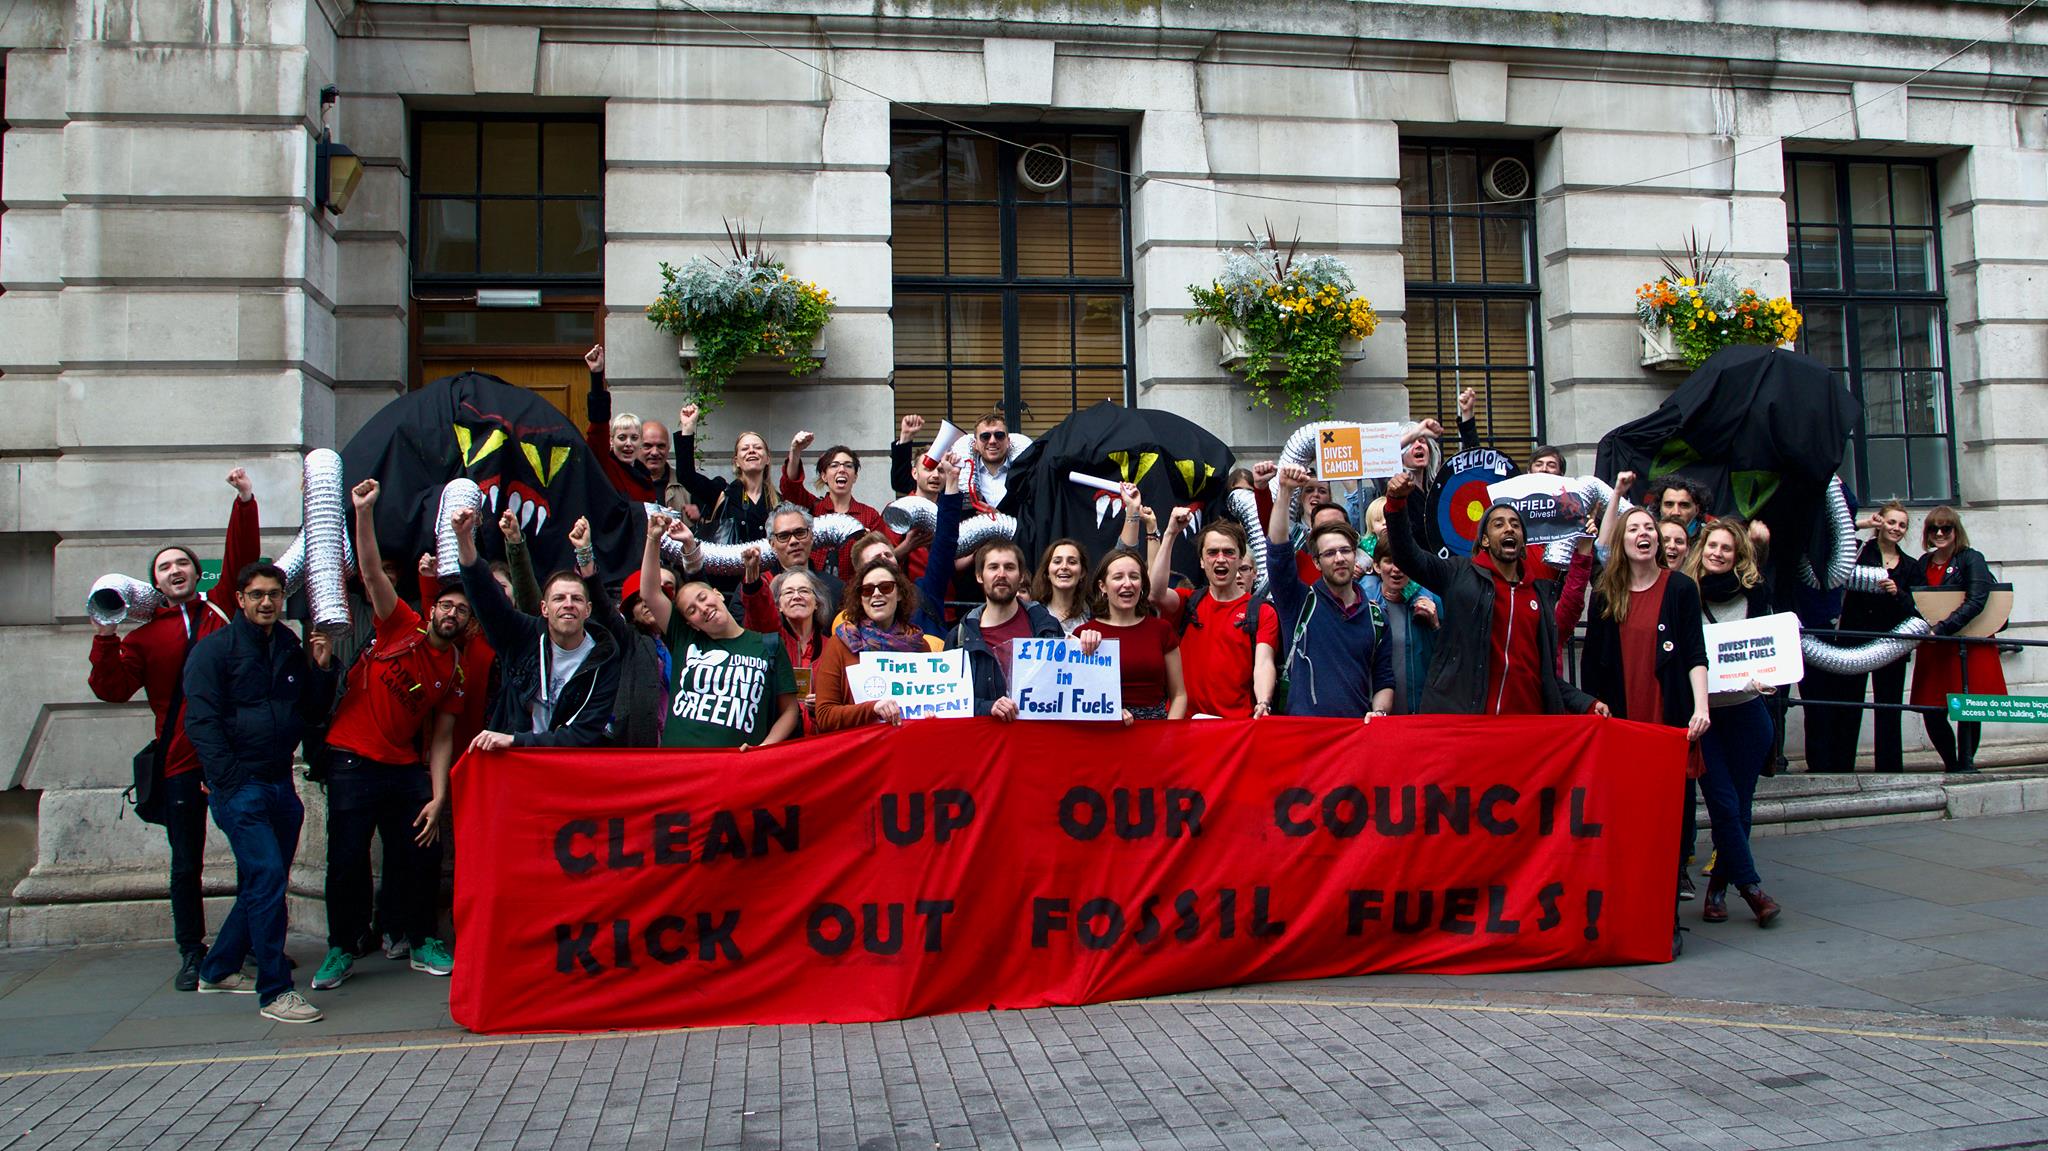 People protesting holding a banner 'Clean up our council - kick out fossil fuels'